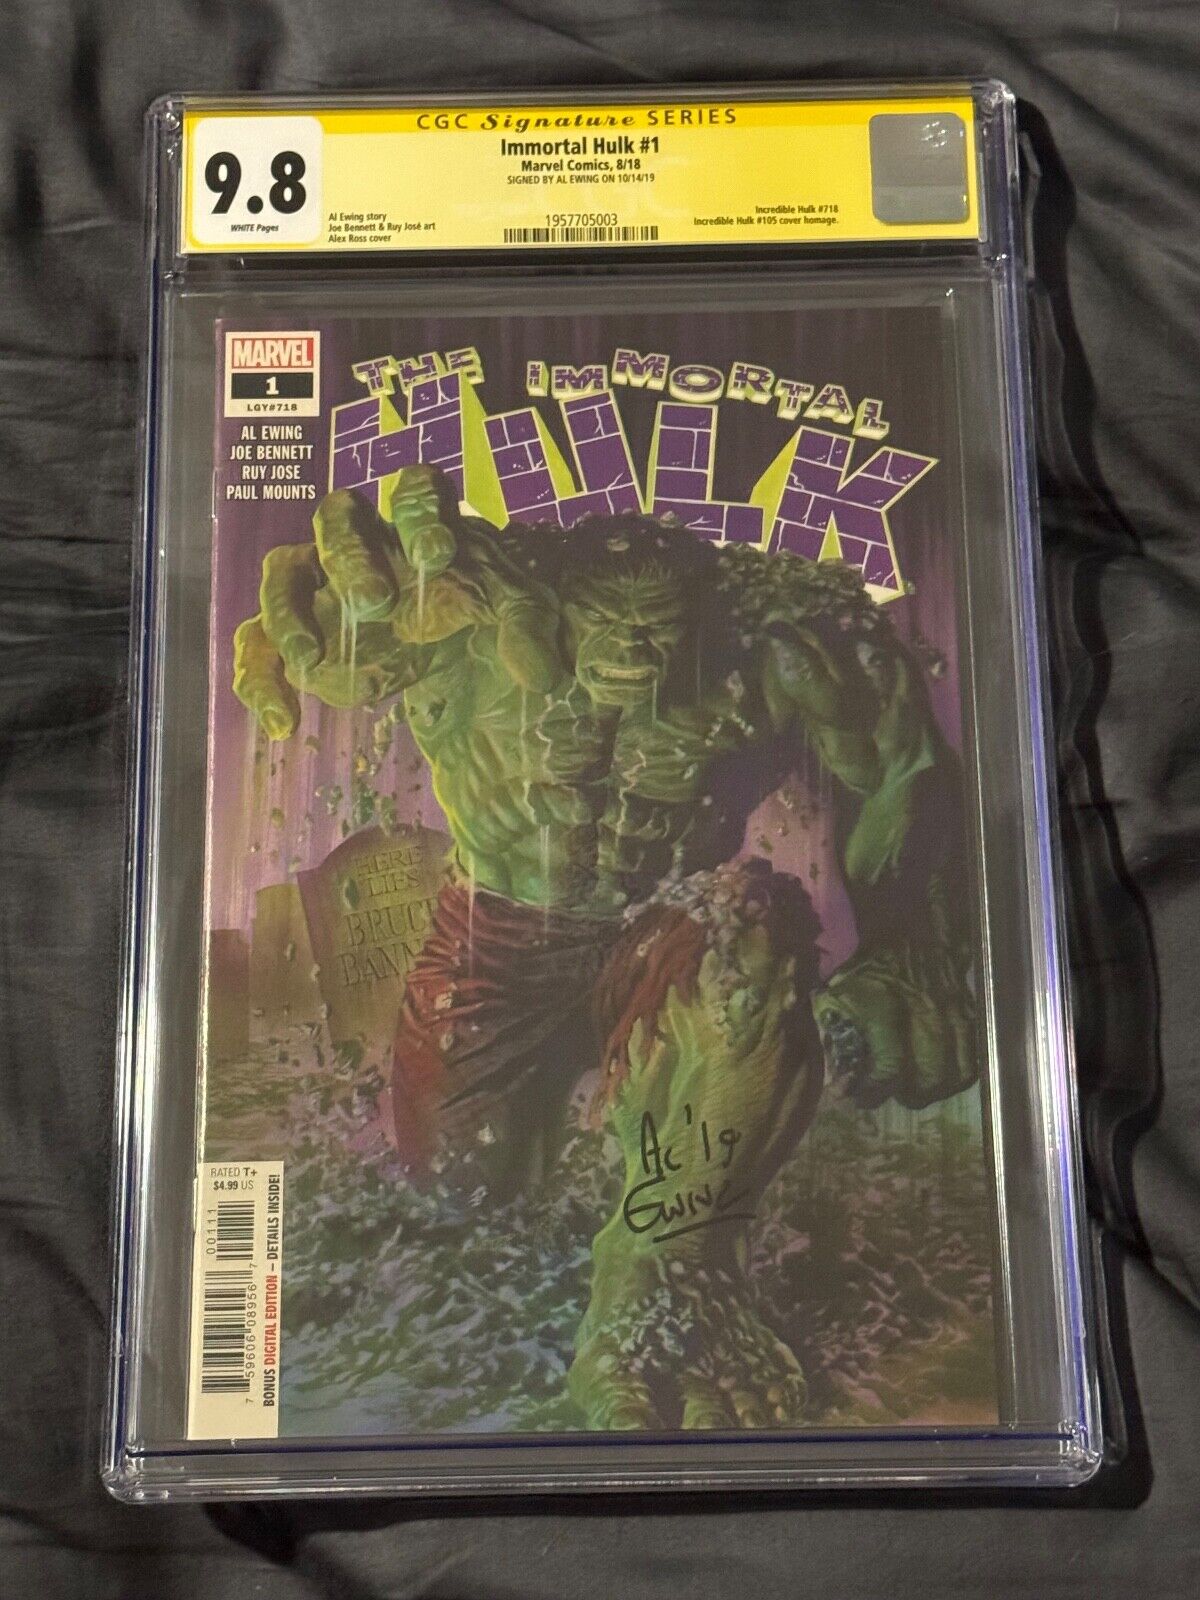 IMMORTAL HULK #1 CGC SS 9.8 ALEX ROSS COVER AND AL EWING SIGNED